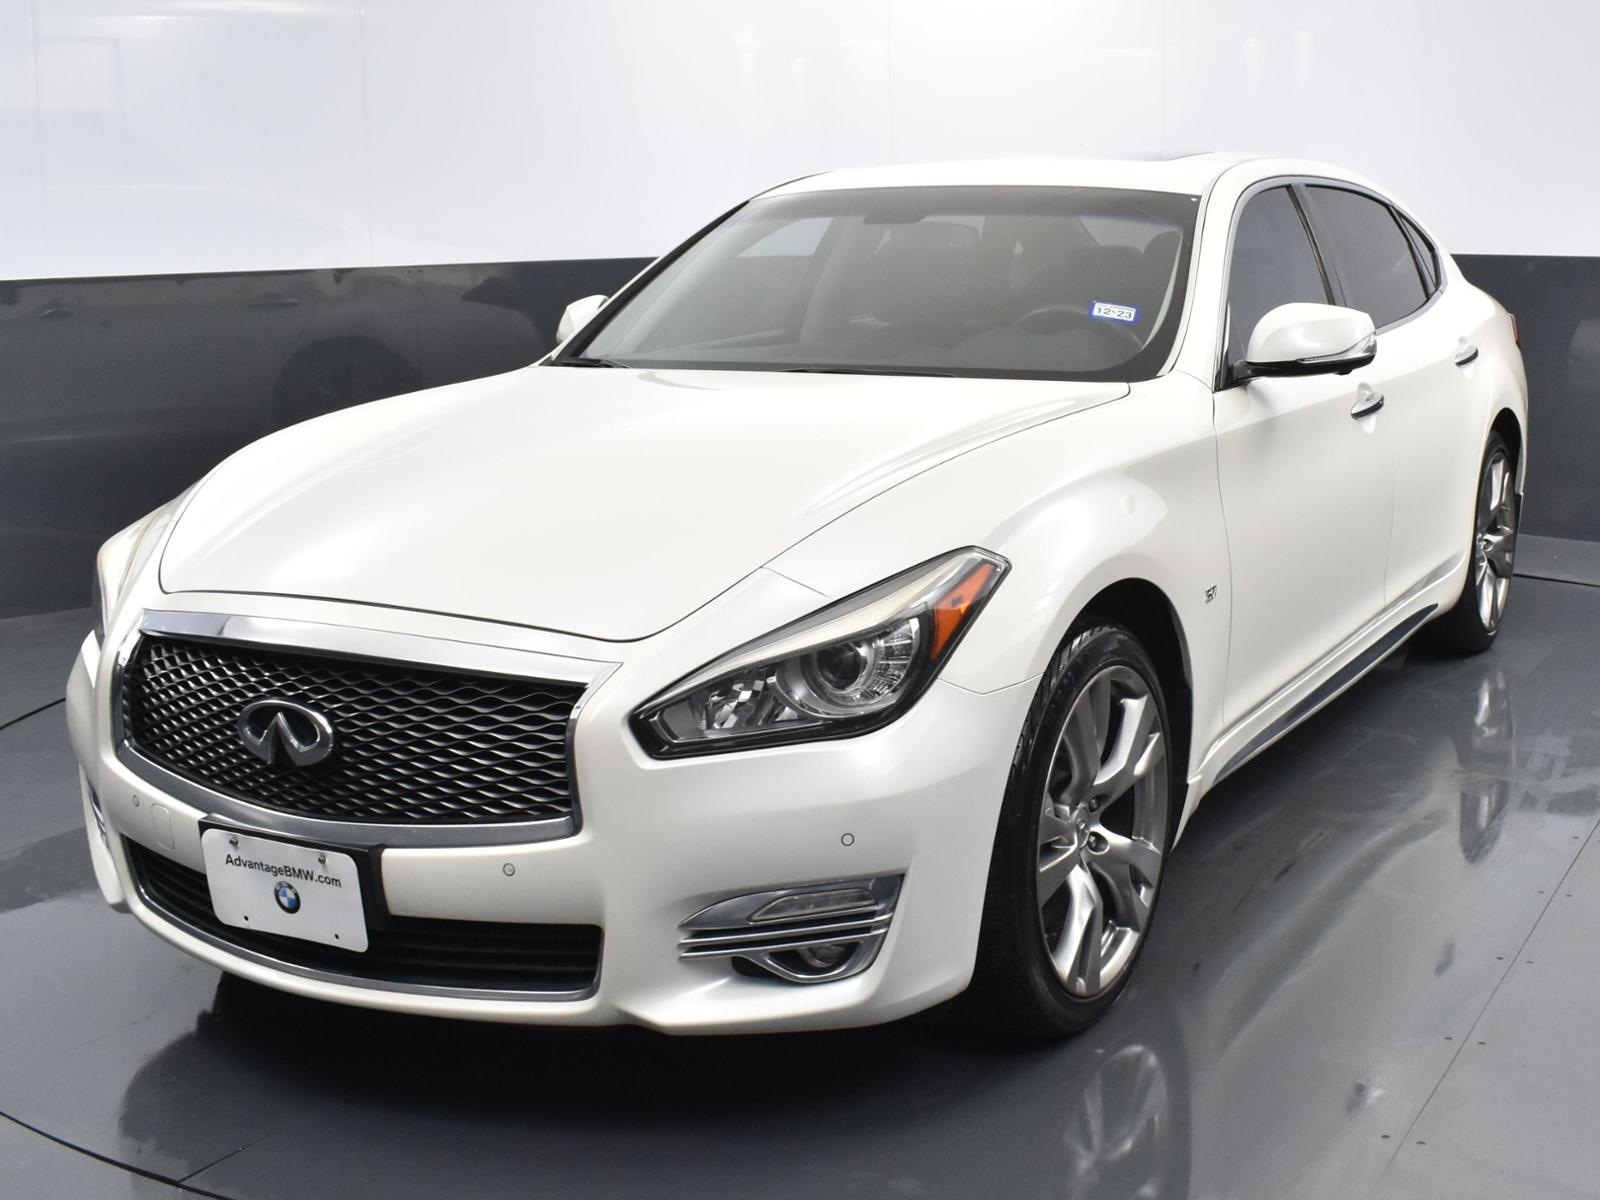 Pre-Owned 2017 INFINITI Q70L 3.7 AWD 4dr Car in Houston #HM210119 |  Sterling McCall Hyundai